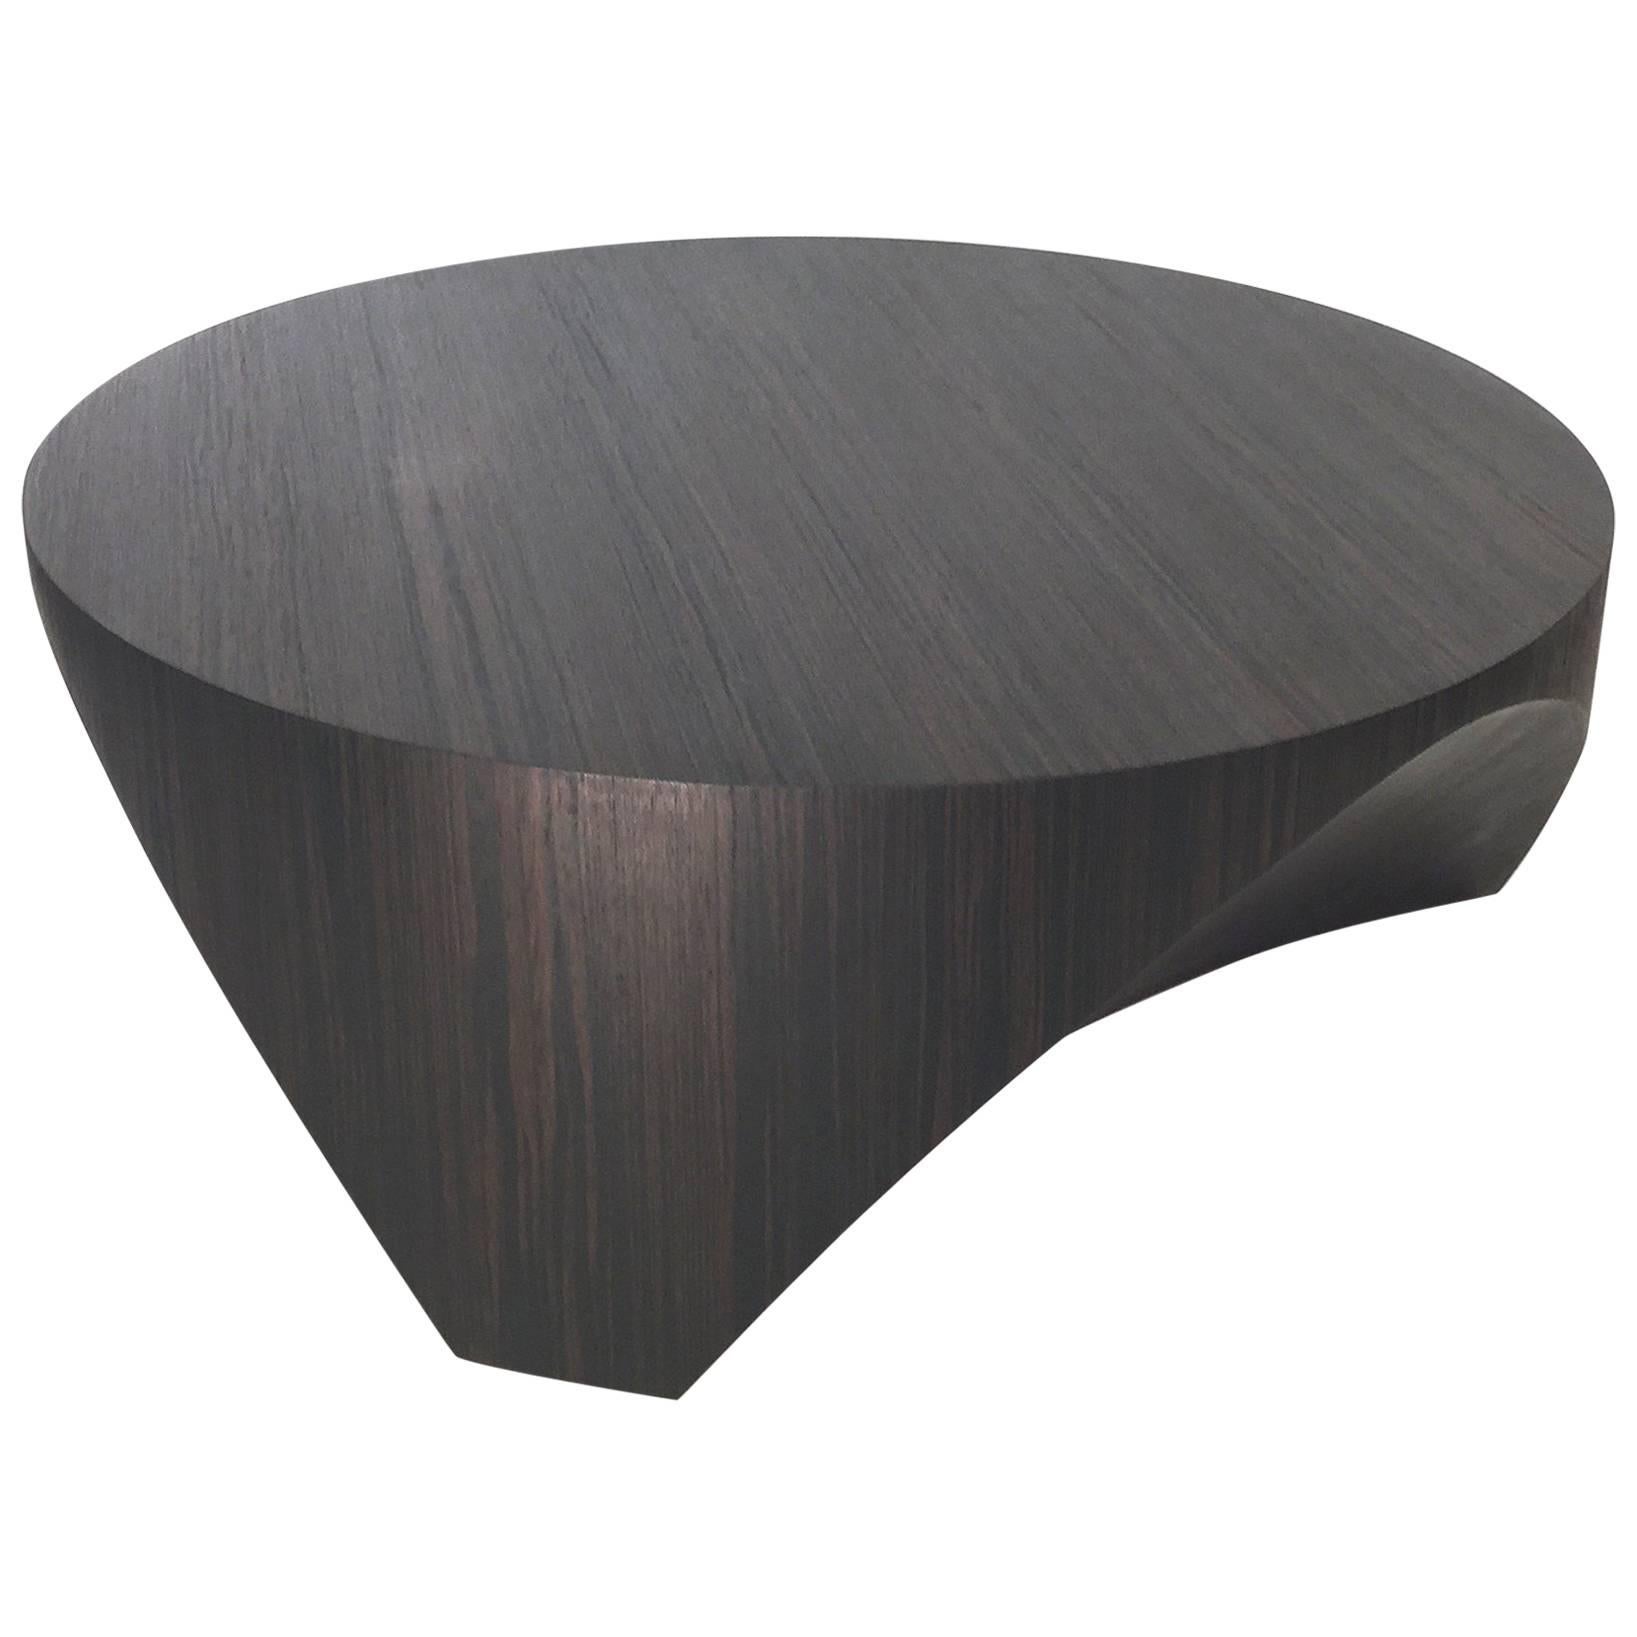 William Earle "Barrens" Cocktail table, round, 40"